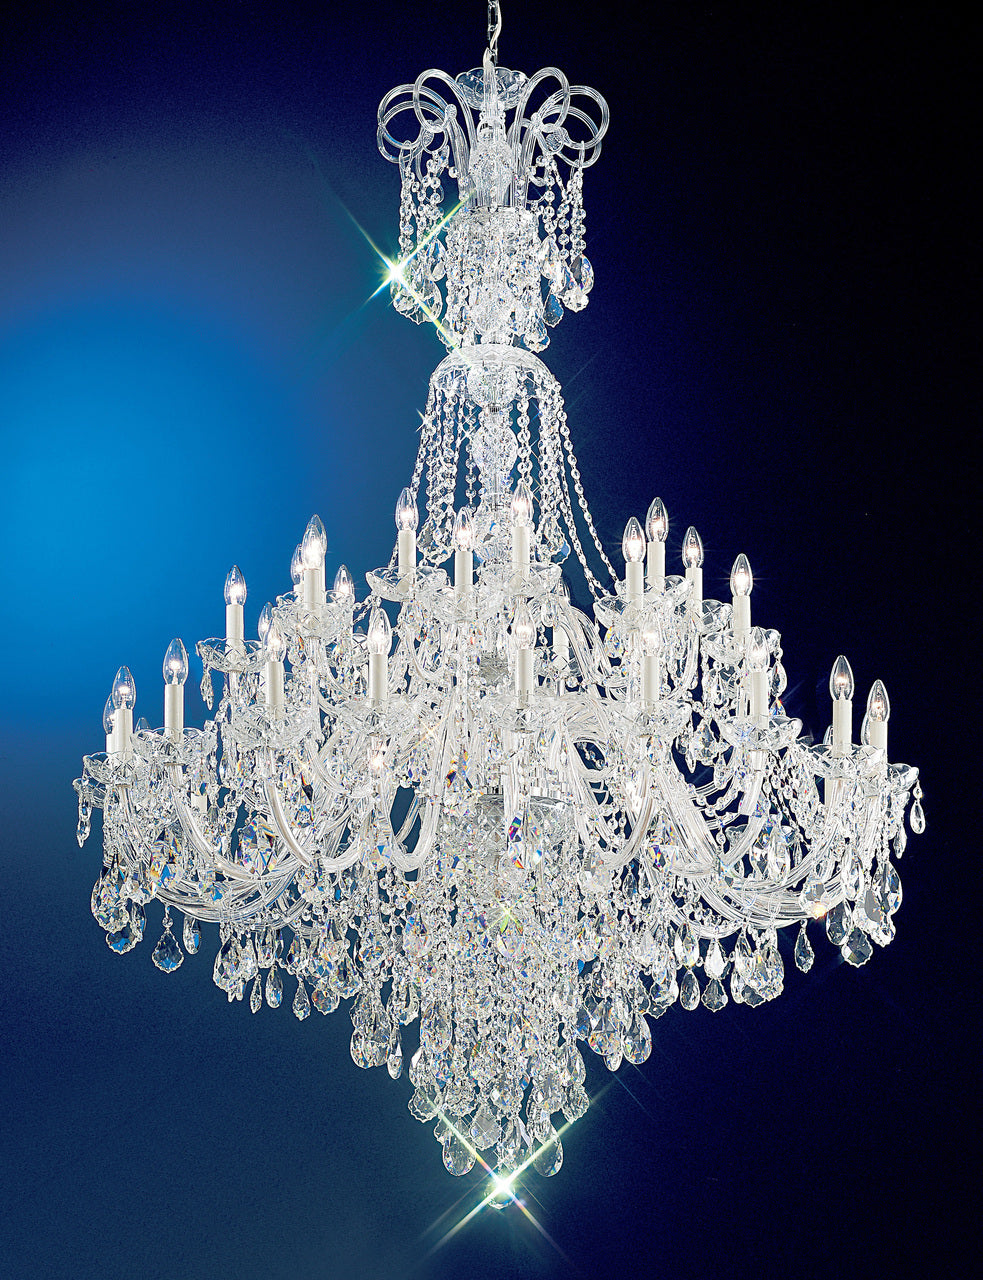 Classic Lighting 8266 CH S Bohemia Crystal/Glass Chandelier in Chrome (Imported from Italy)